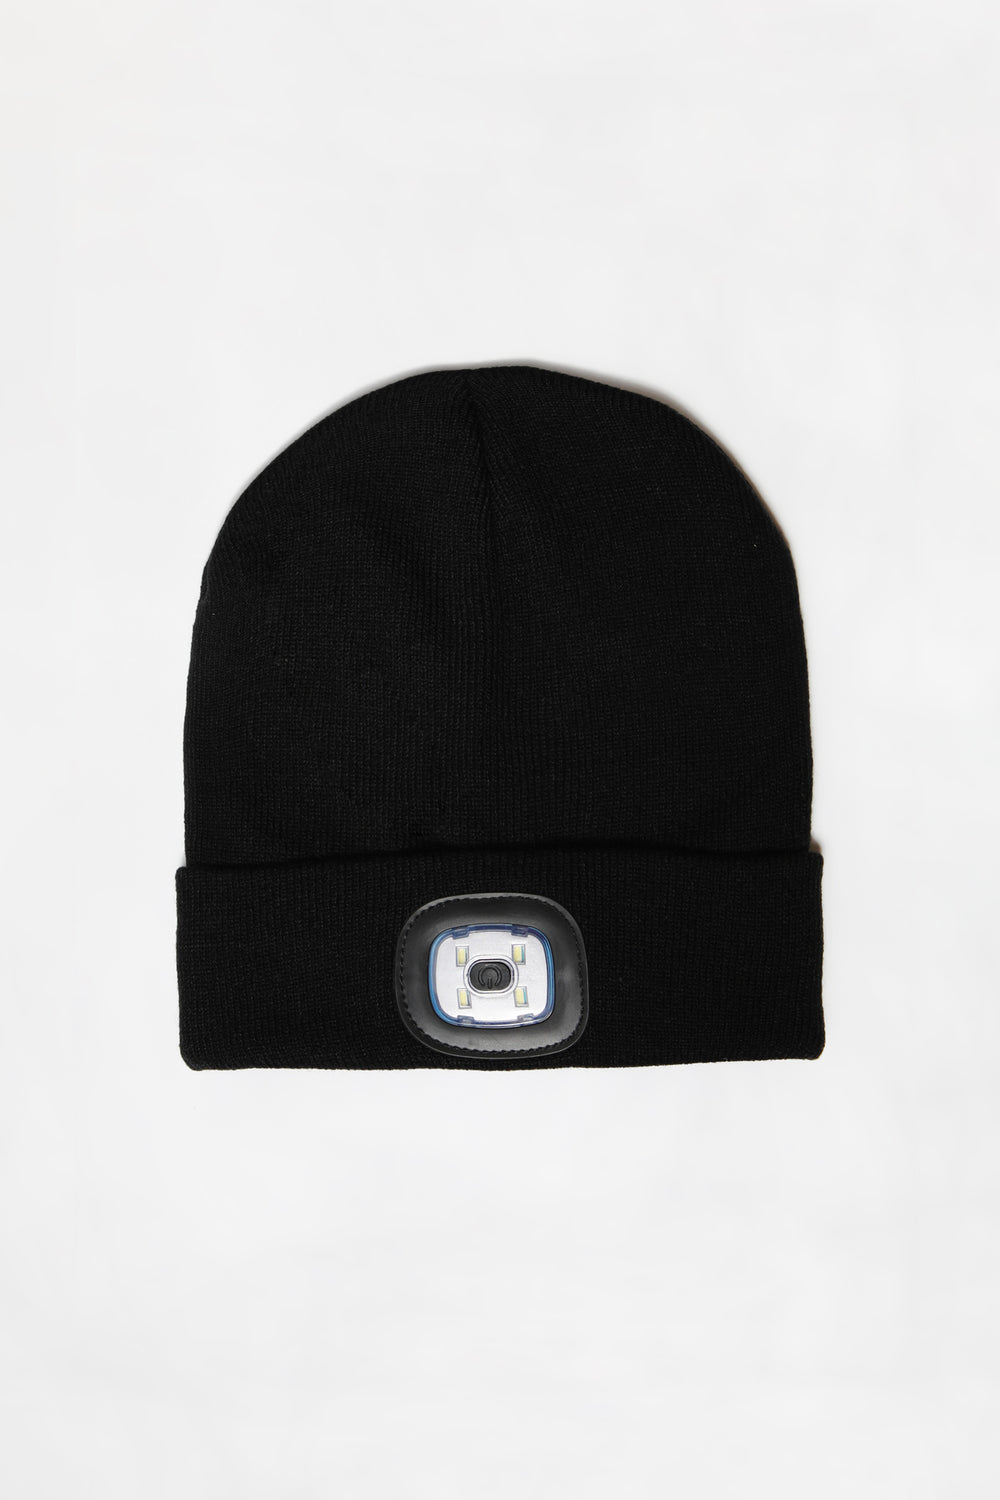 West49 Youth LED Lightup Beanie West49 Youth LED Lightup Beanie